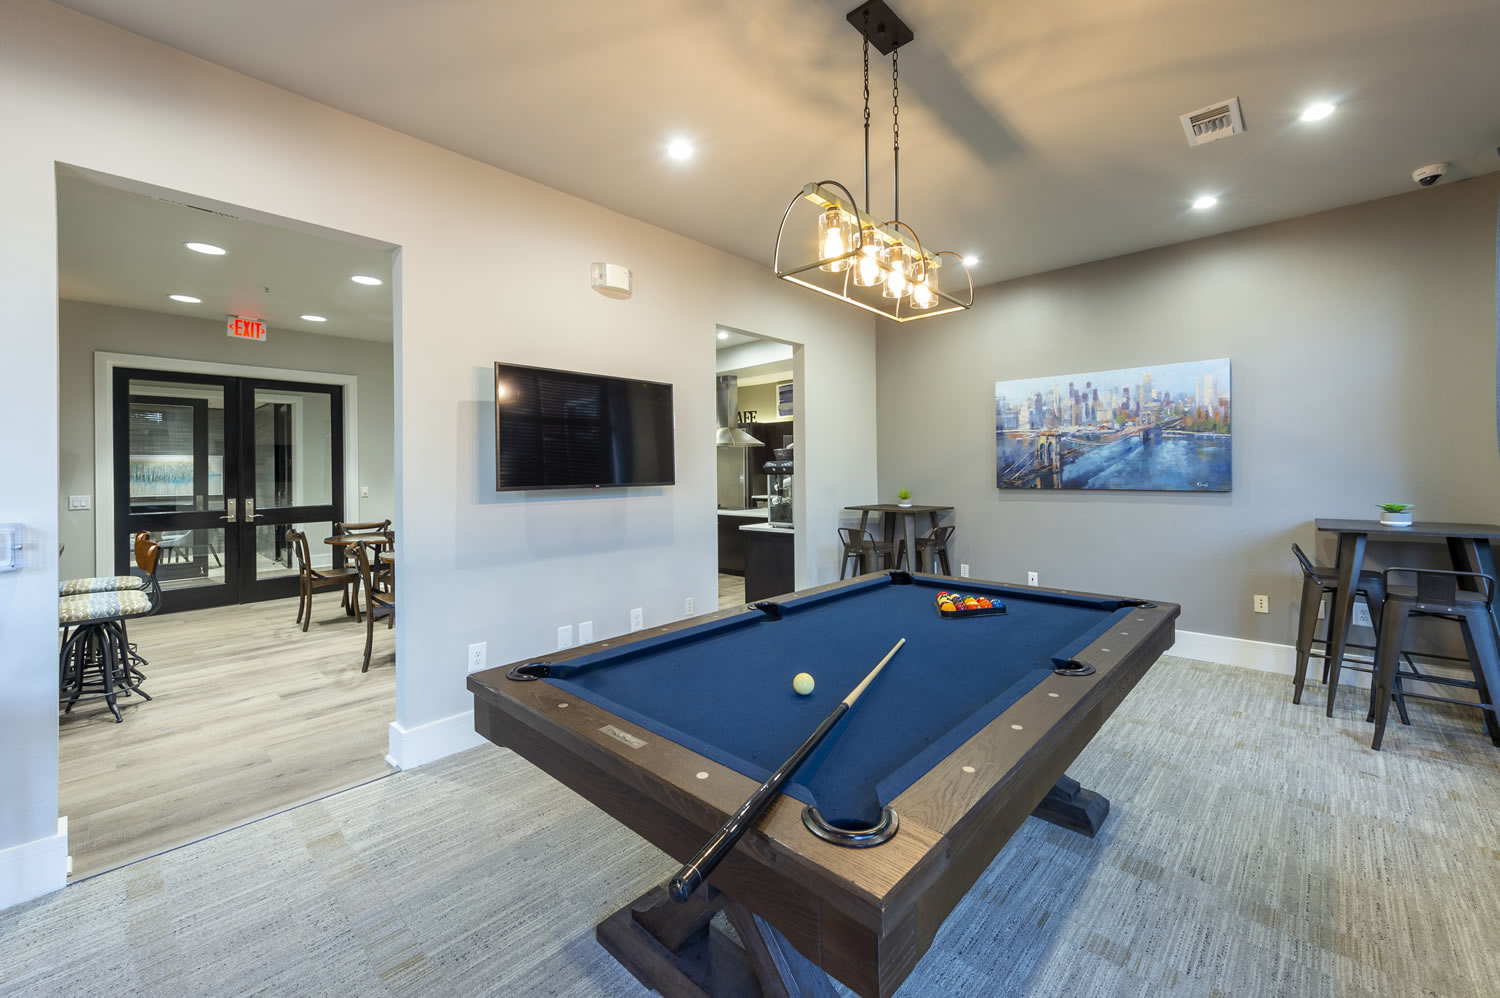 Apartments in Uptown Houston, Galleria Area An upscale living room in a Galleria Area apartment featuring a pool table and a sleek flat screen TV.